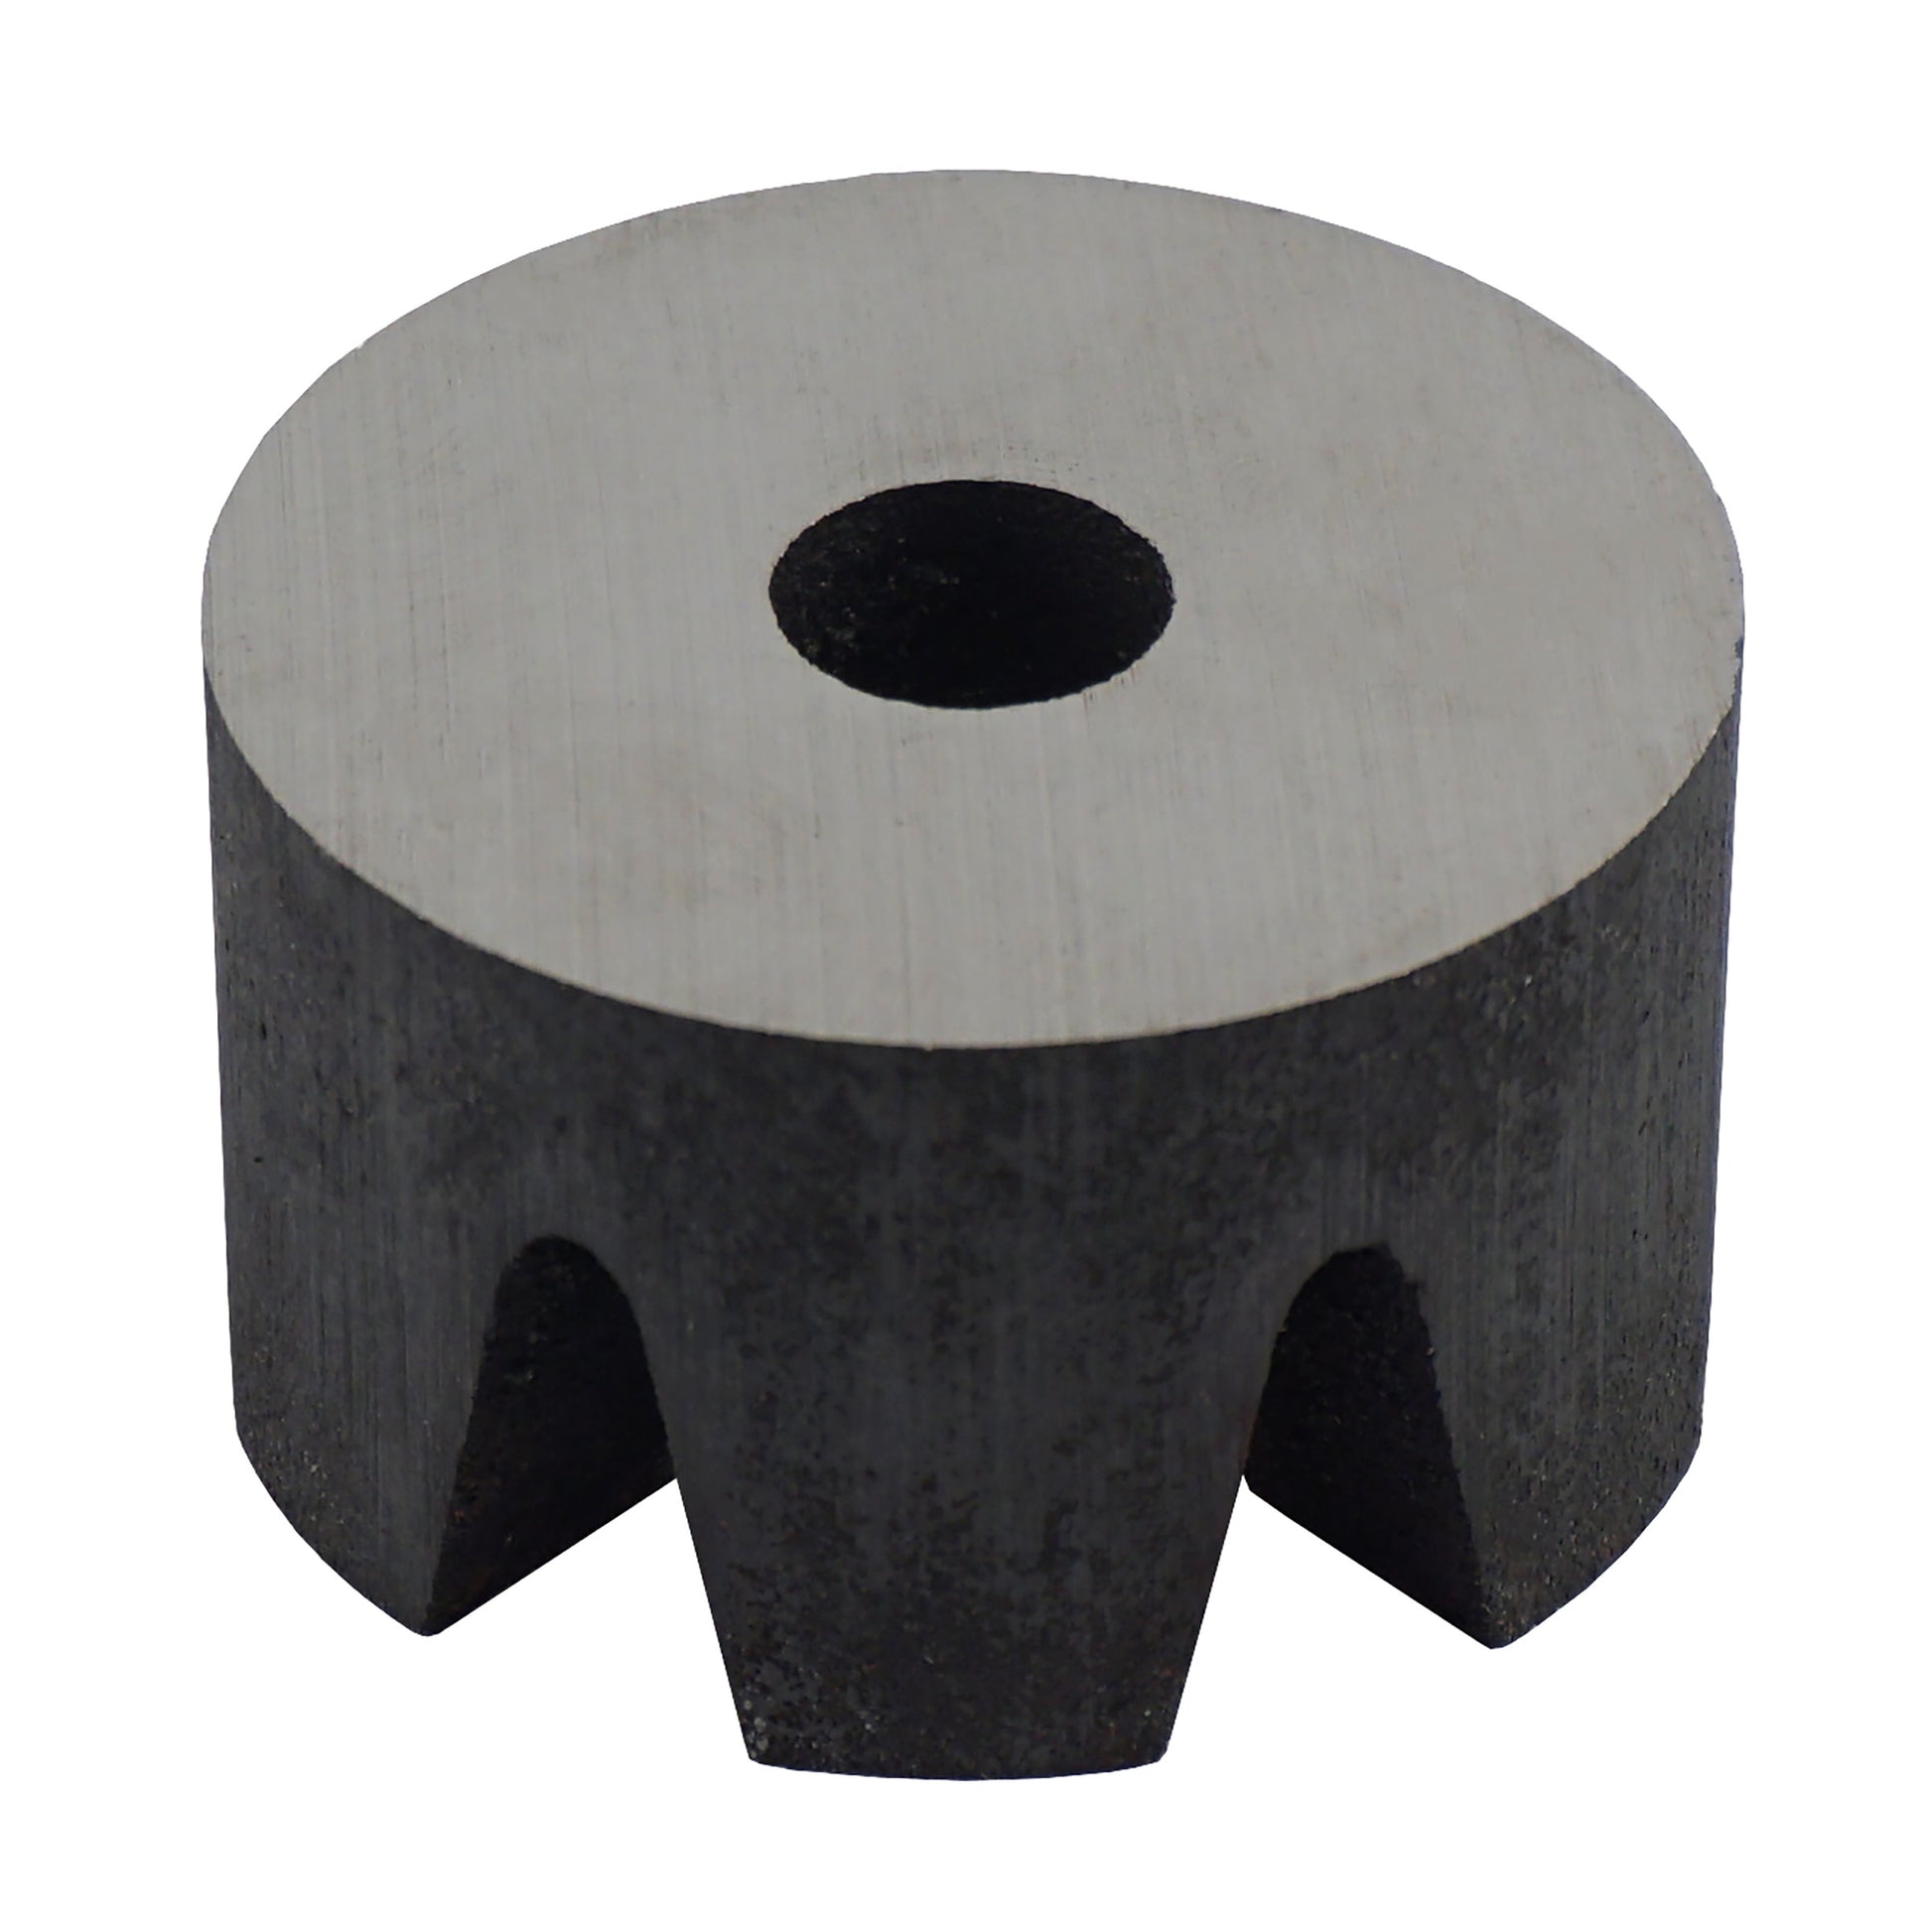 Load image into Gallery viewer, AH63133 Alnico 6-Pole Holding Magnet - 45 Degree Angle View